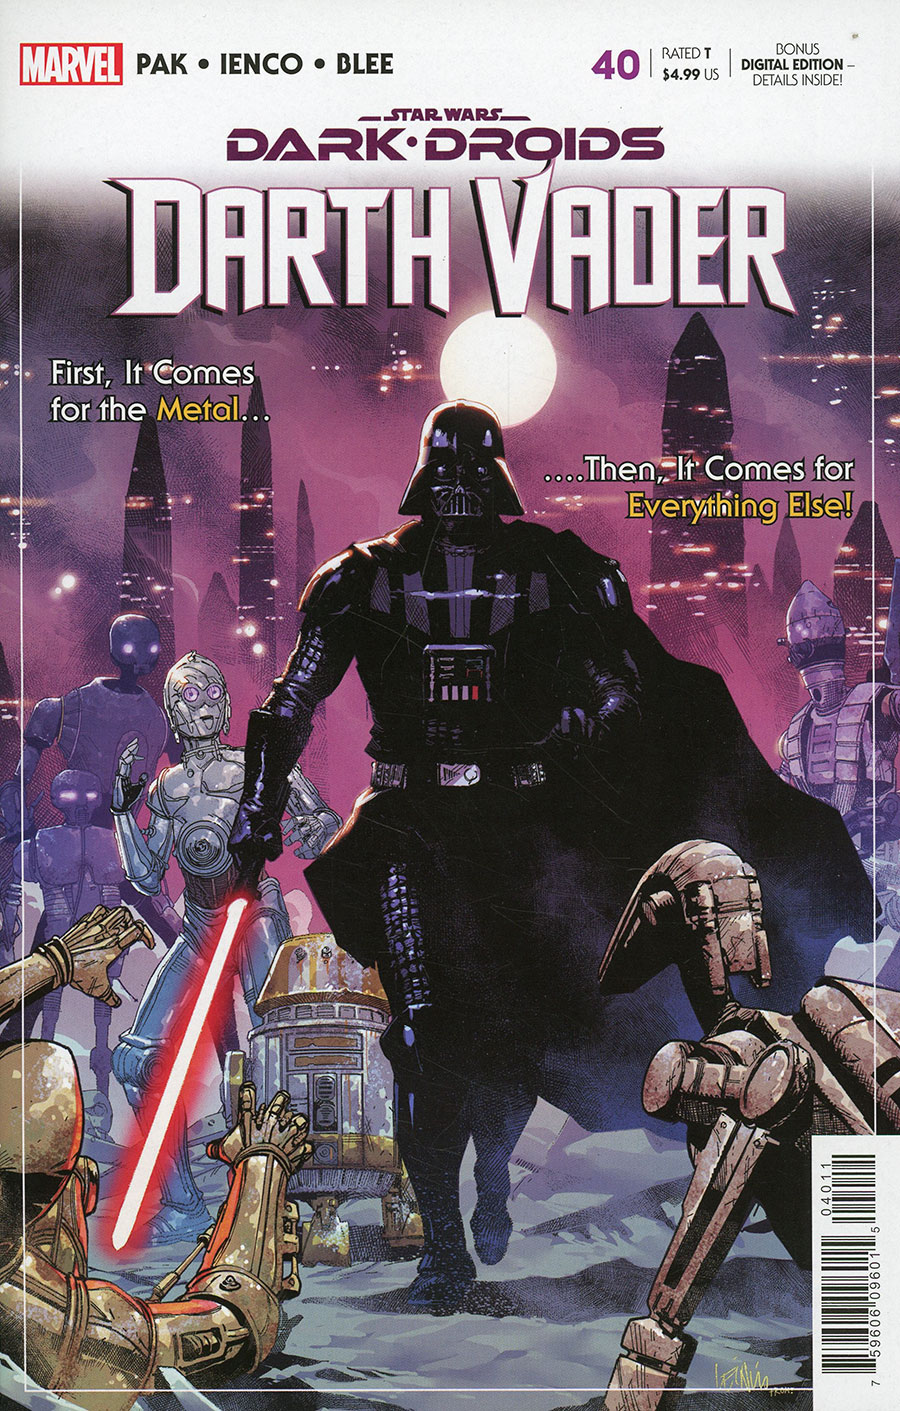 Star Wars Darth Vader #40 Cover A Regular Leinil Francis Yu Cover (Dark Droids Tie-In)